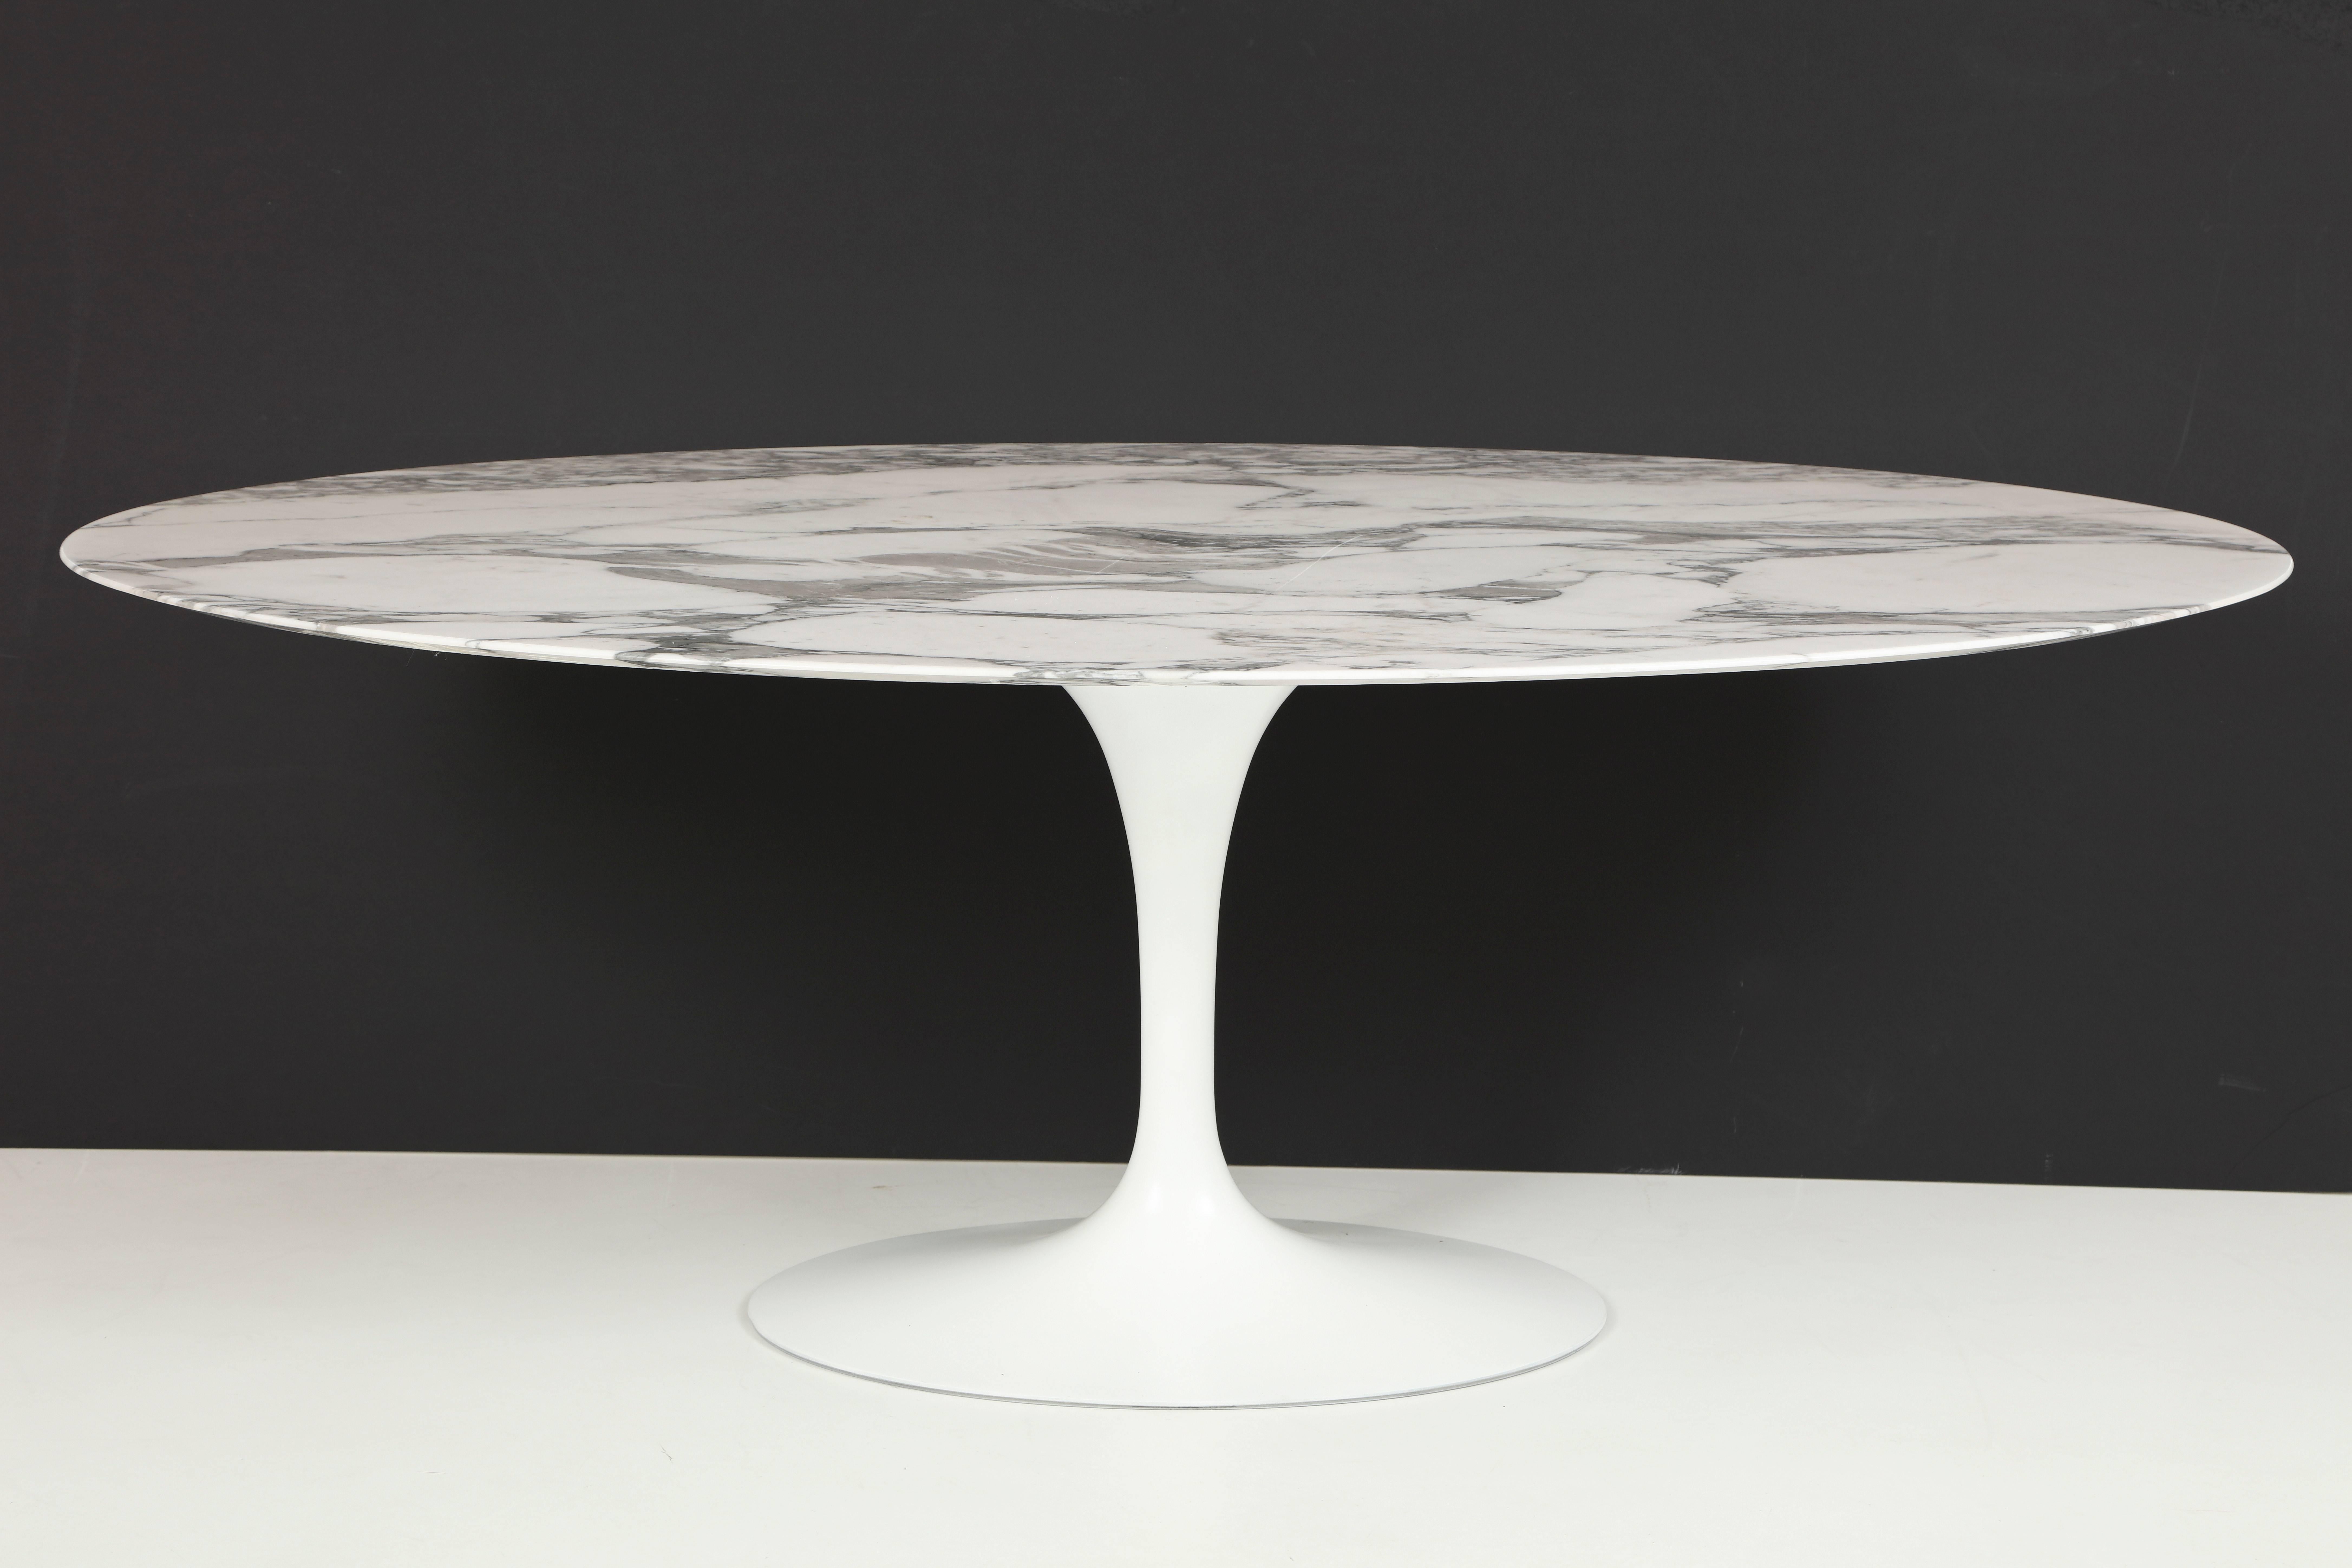 Large and stunning tulip table by Saarinen. Beautifully variegated white oval top with striations in varying shades of grey.